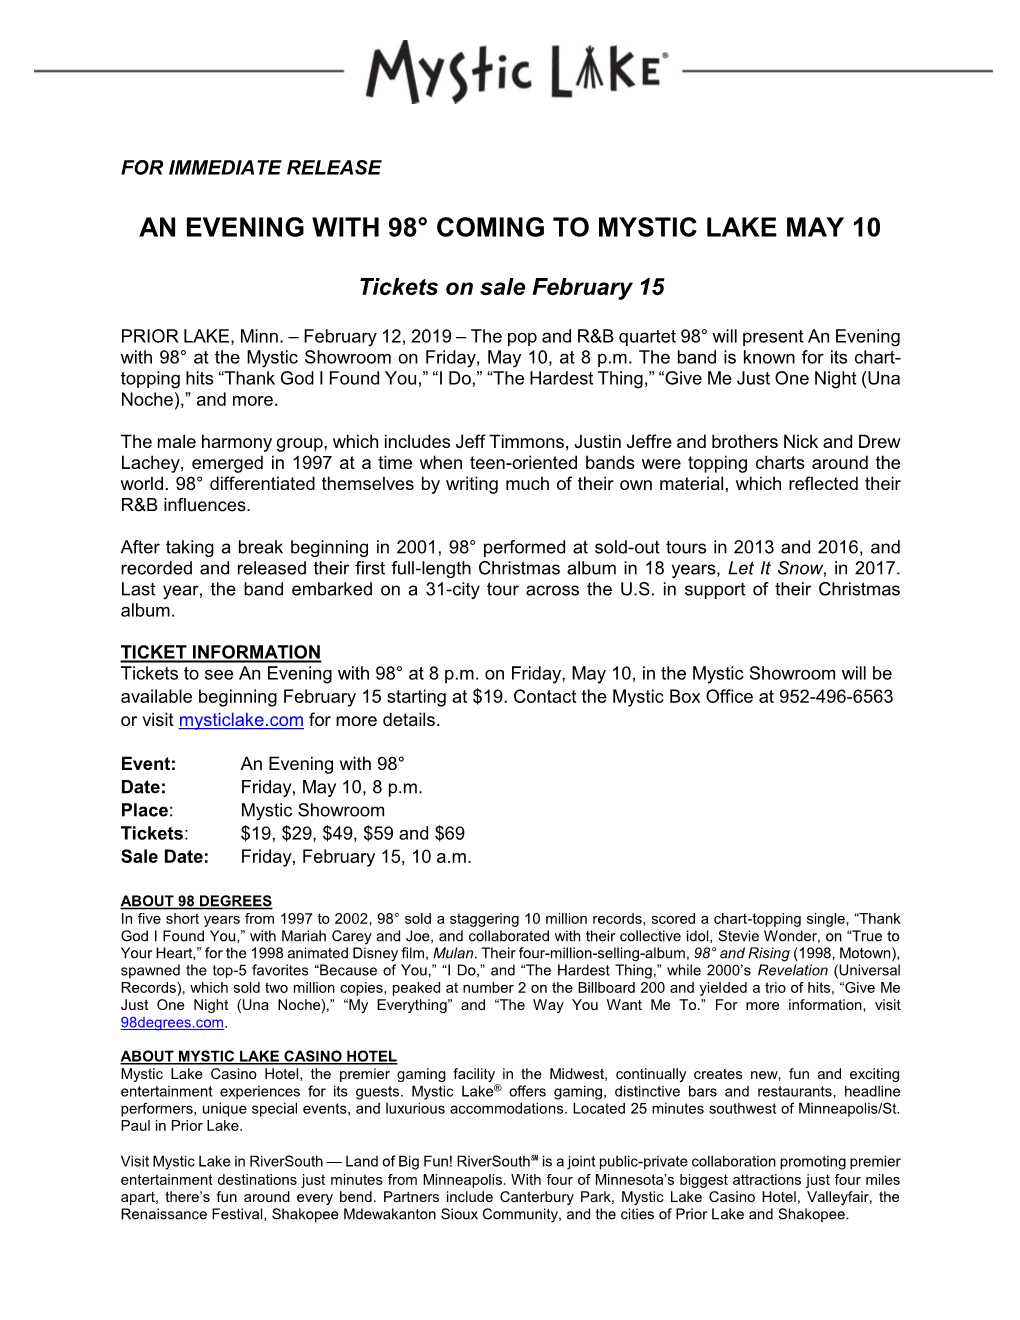 An Evening with 98° Coming to Mystic Lake May 10